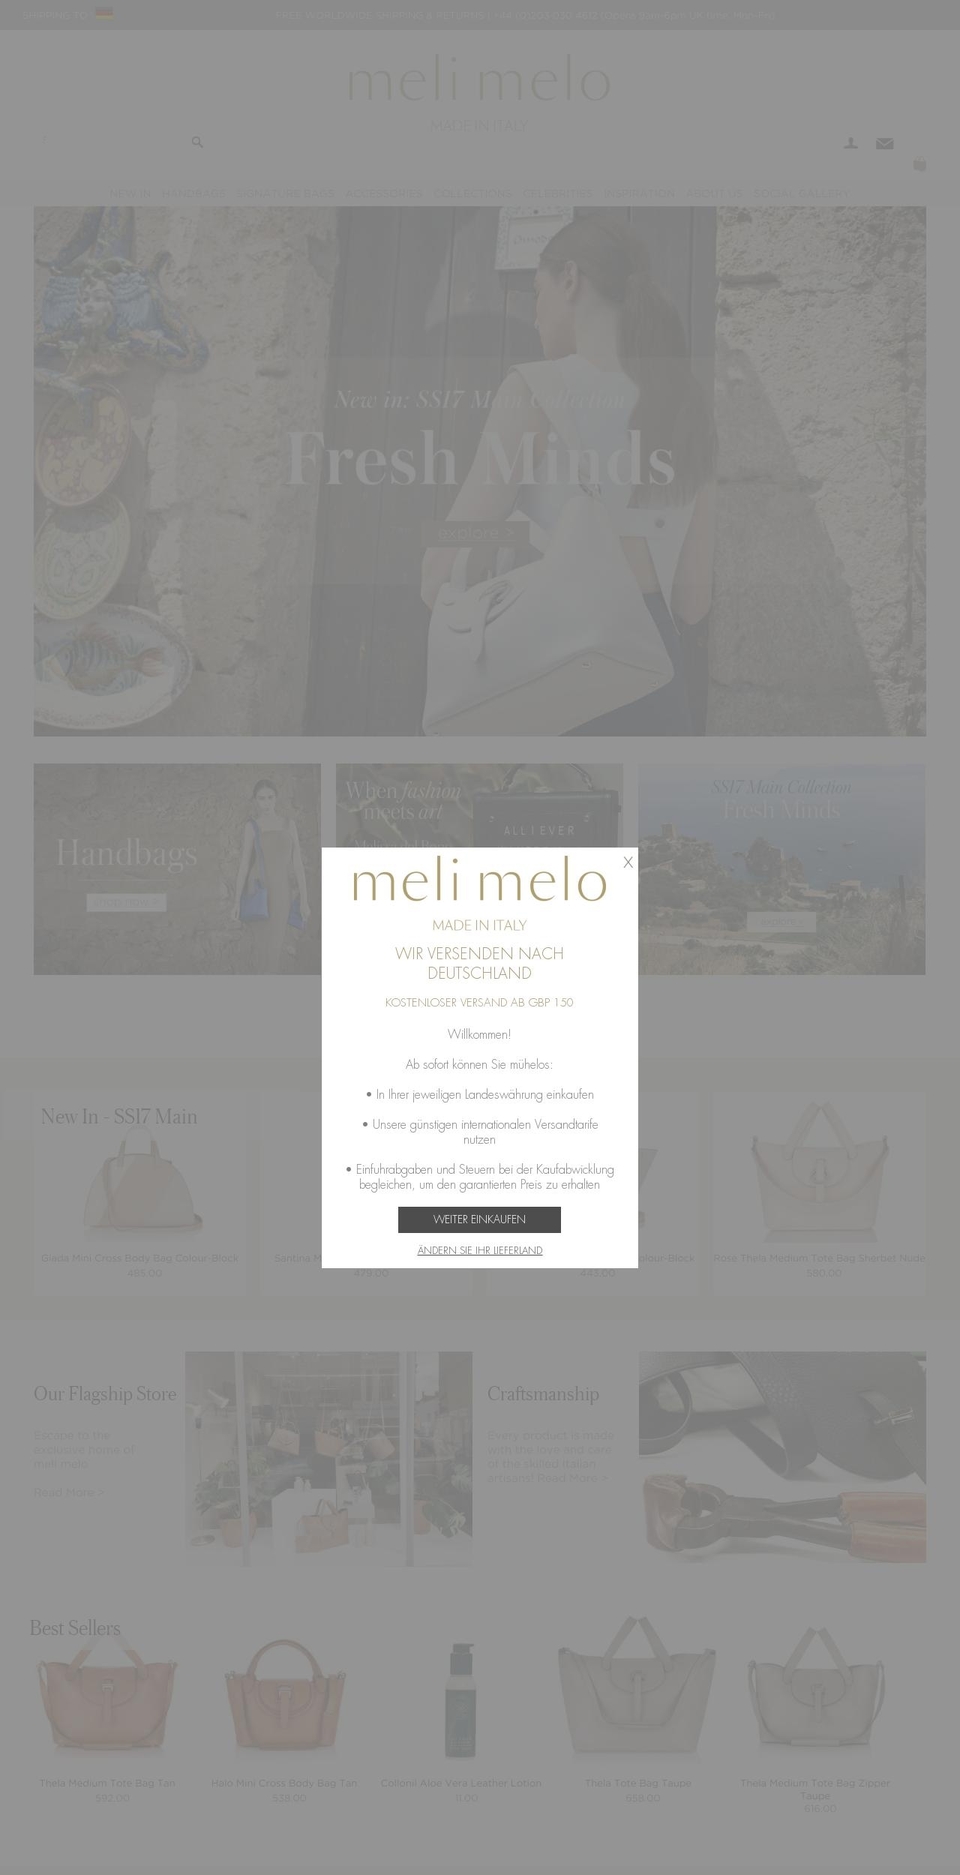 Maker Shopify theme site example melimelo.co.uk